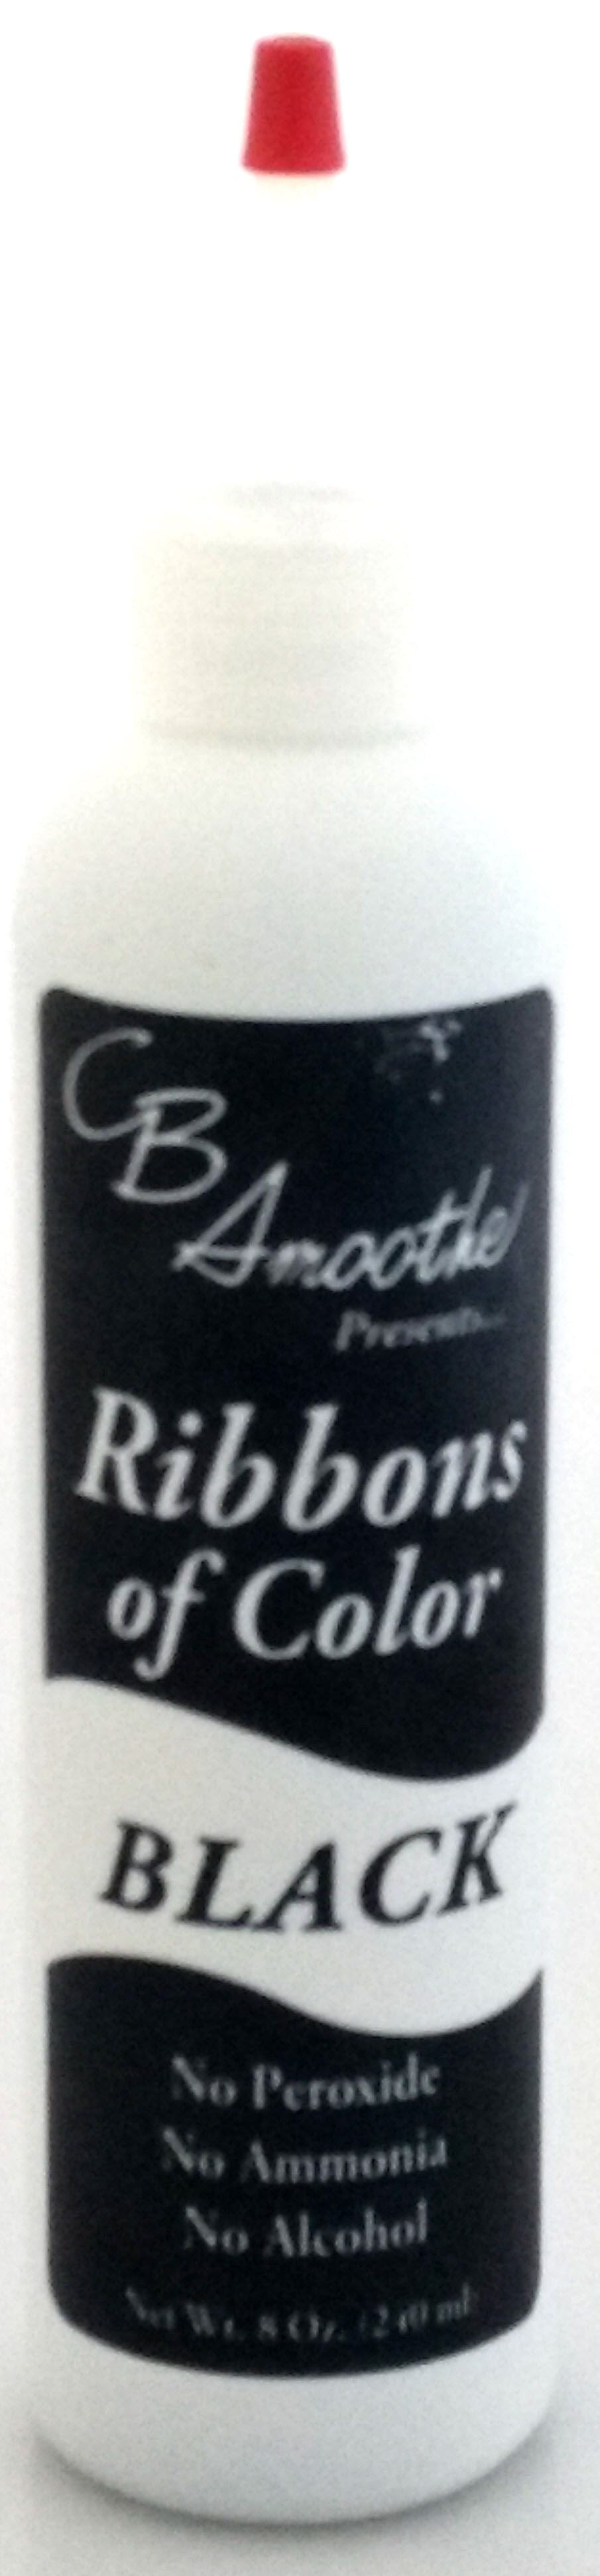 CB Smoothe Ribbons of Color Black 8oz